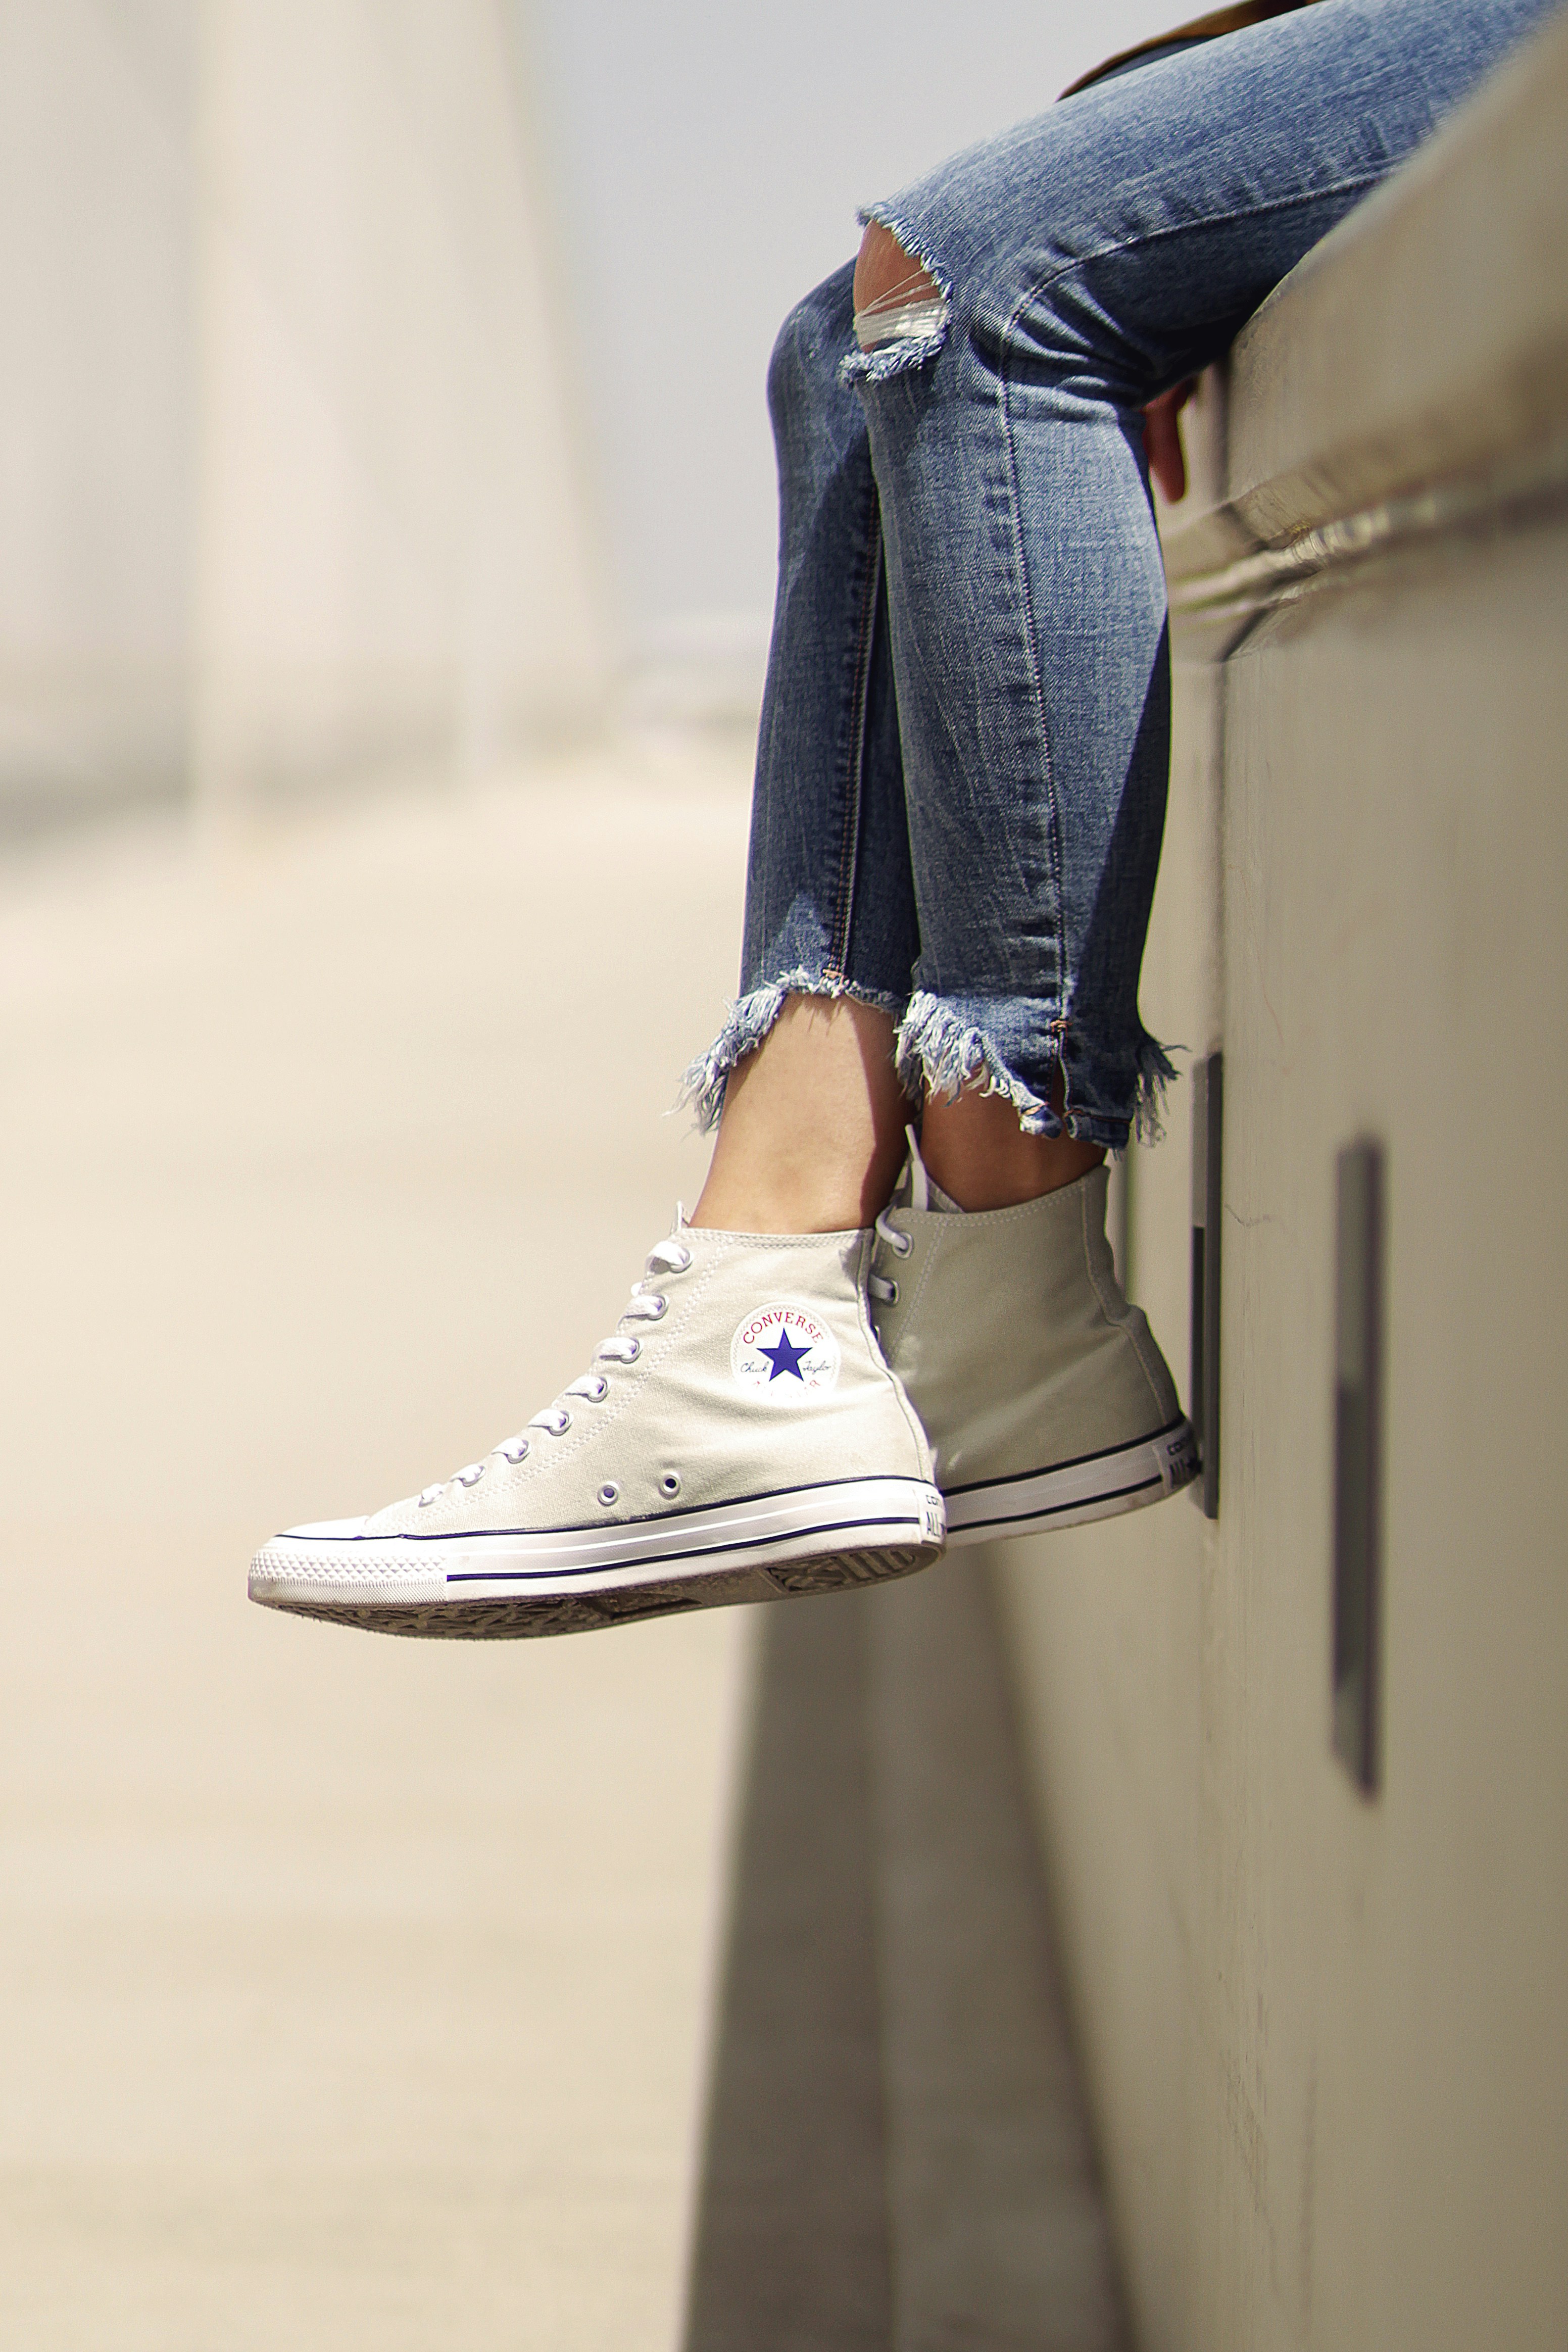 100+ Converse Pictures | Download Free 